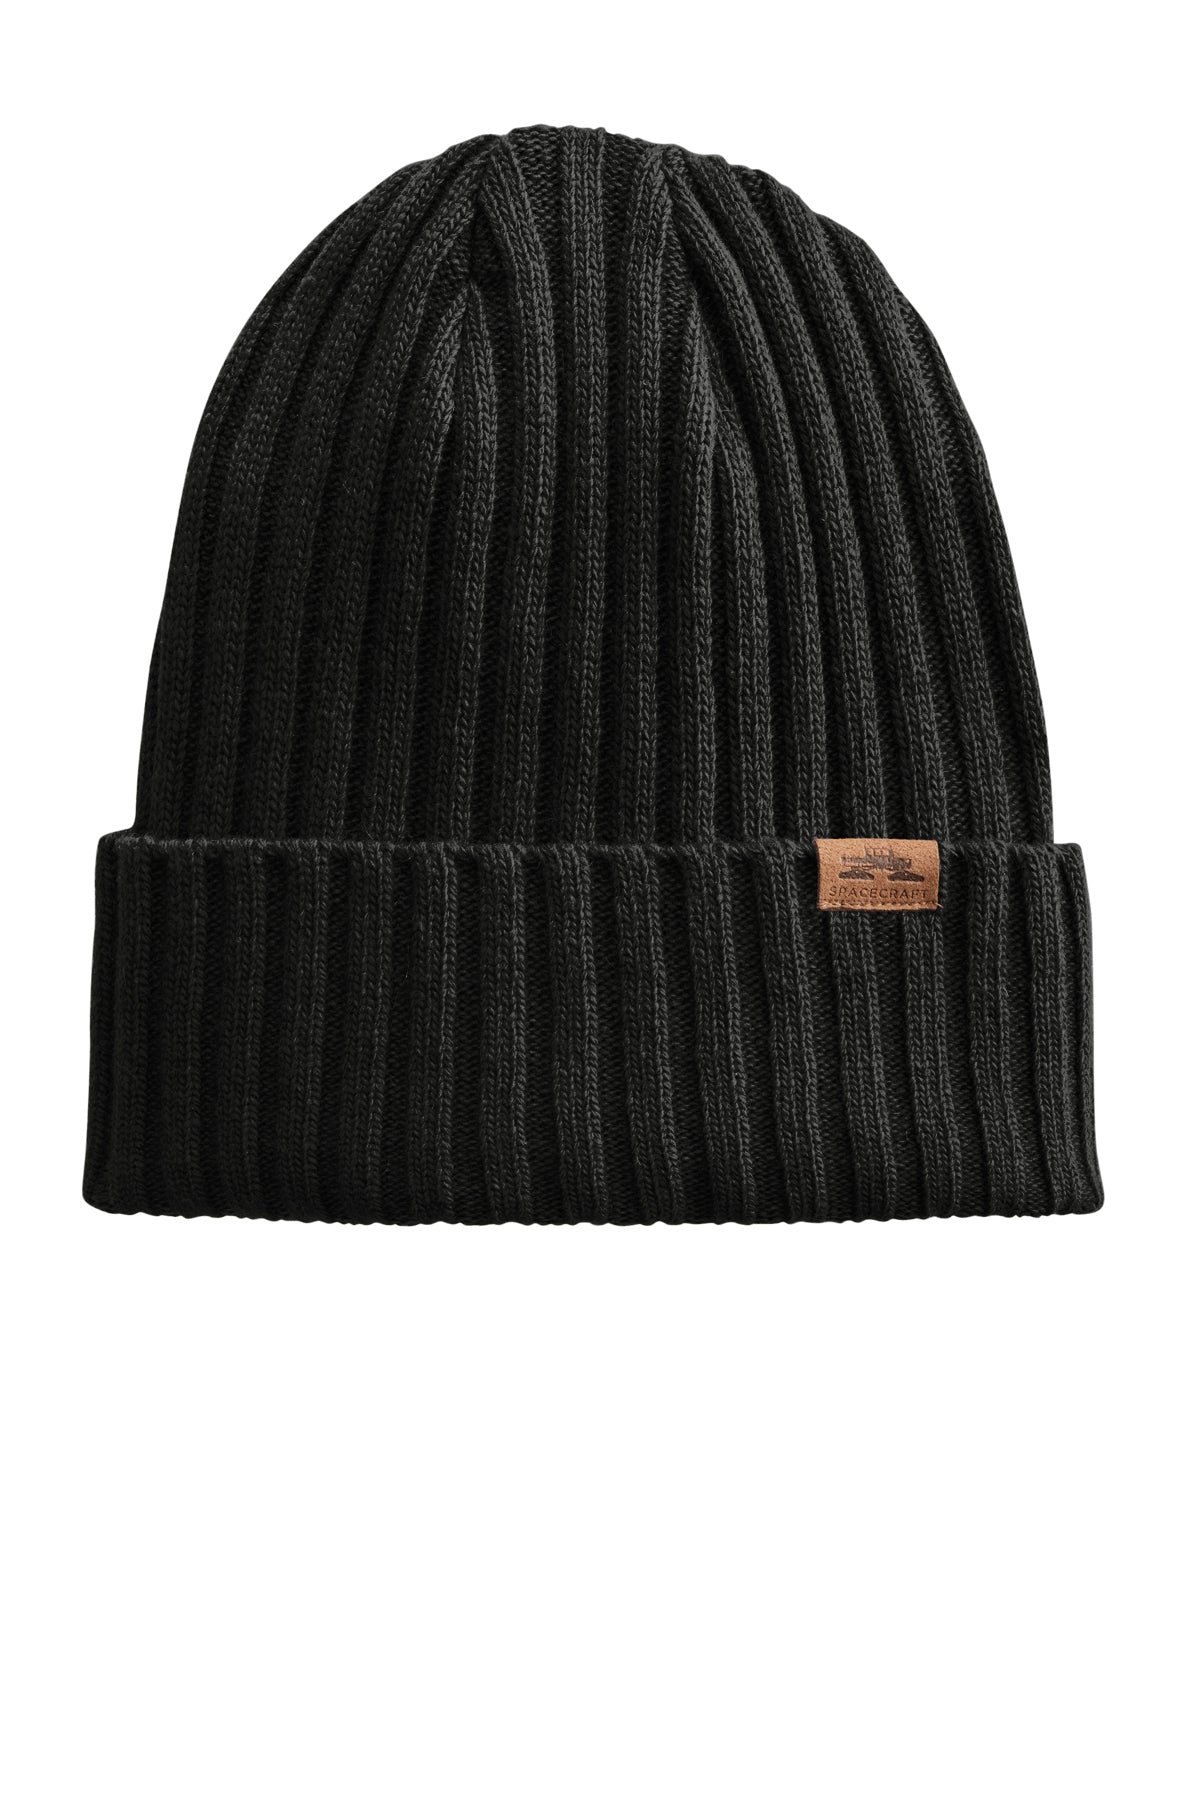 LIMITED EDITION Spacecraft Square Knot Beanie w/ Custom Patch